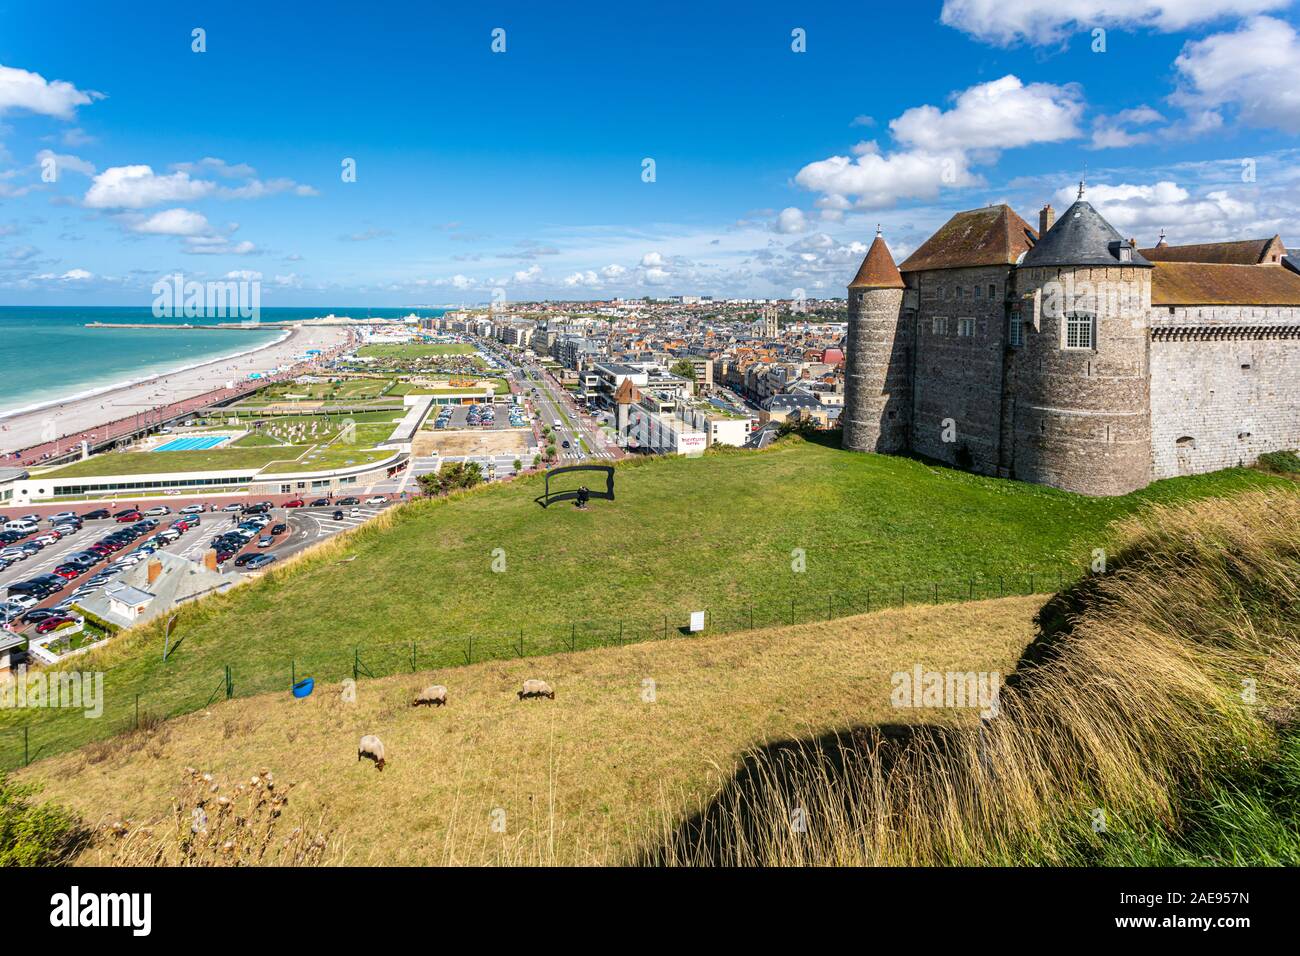 Panoramic view of Dieppe town, fishing port on the English Channel. On a clifftop overlooking pebbly Dieppe Beach is the centuries-old Chateau de Diep Stock Photo